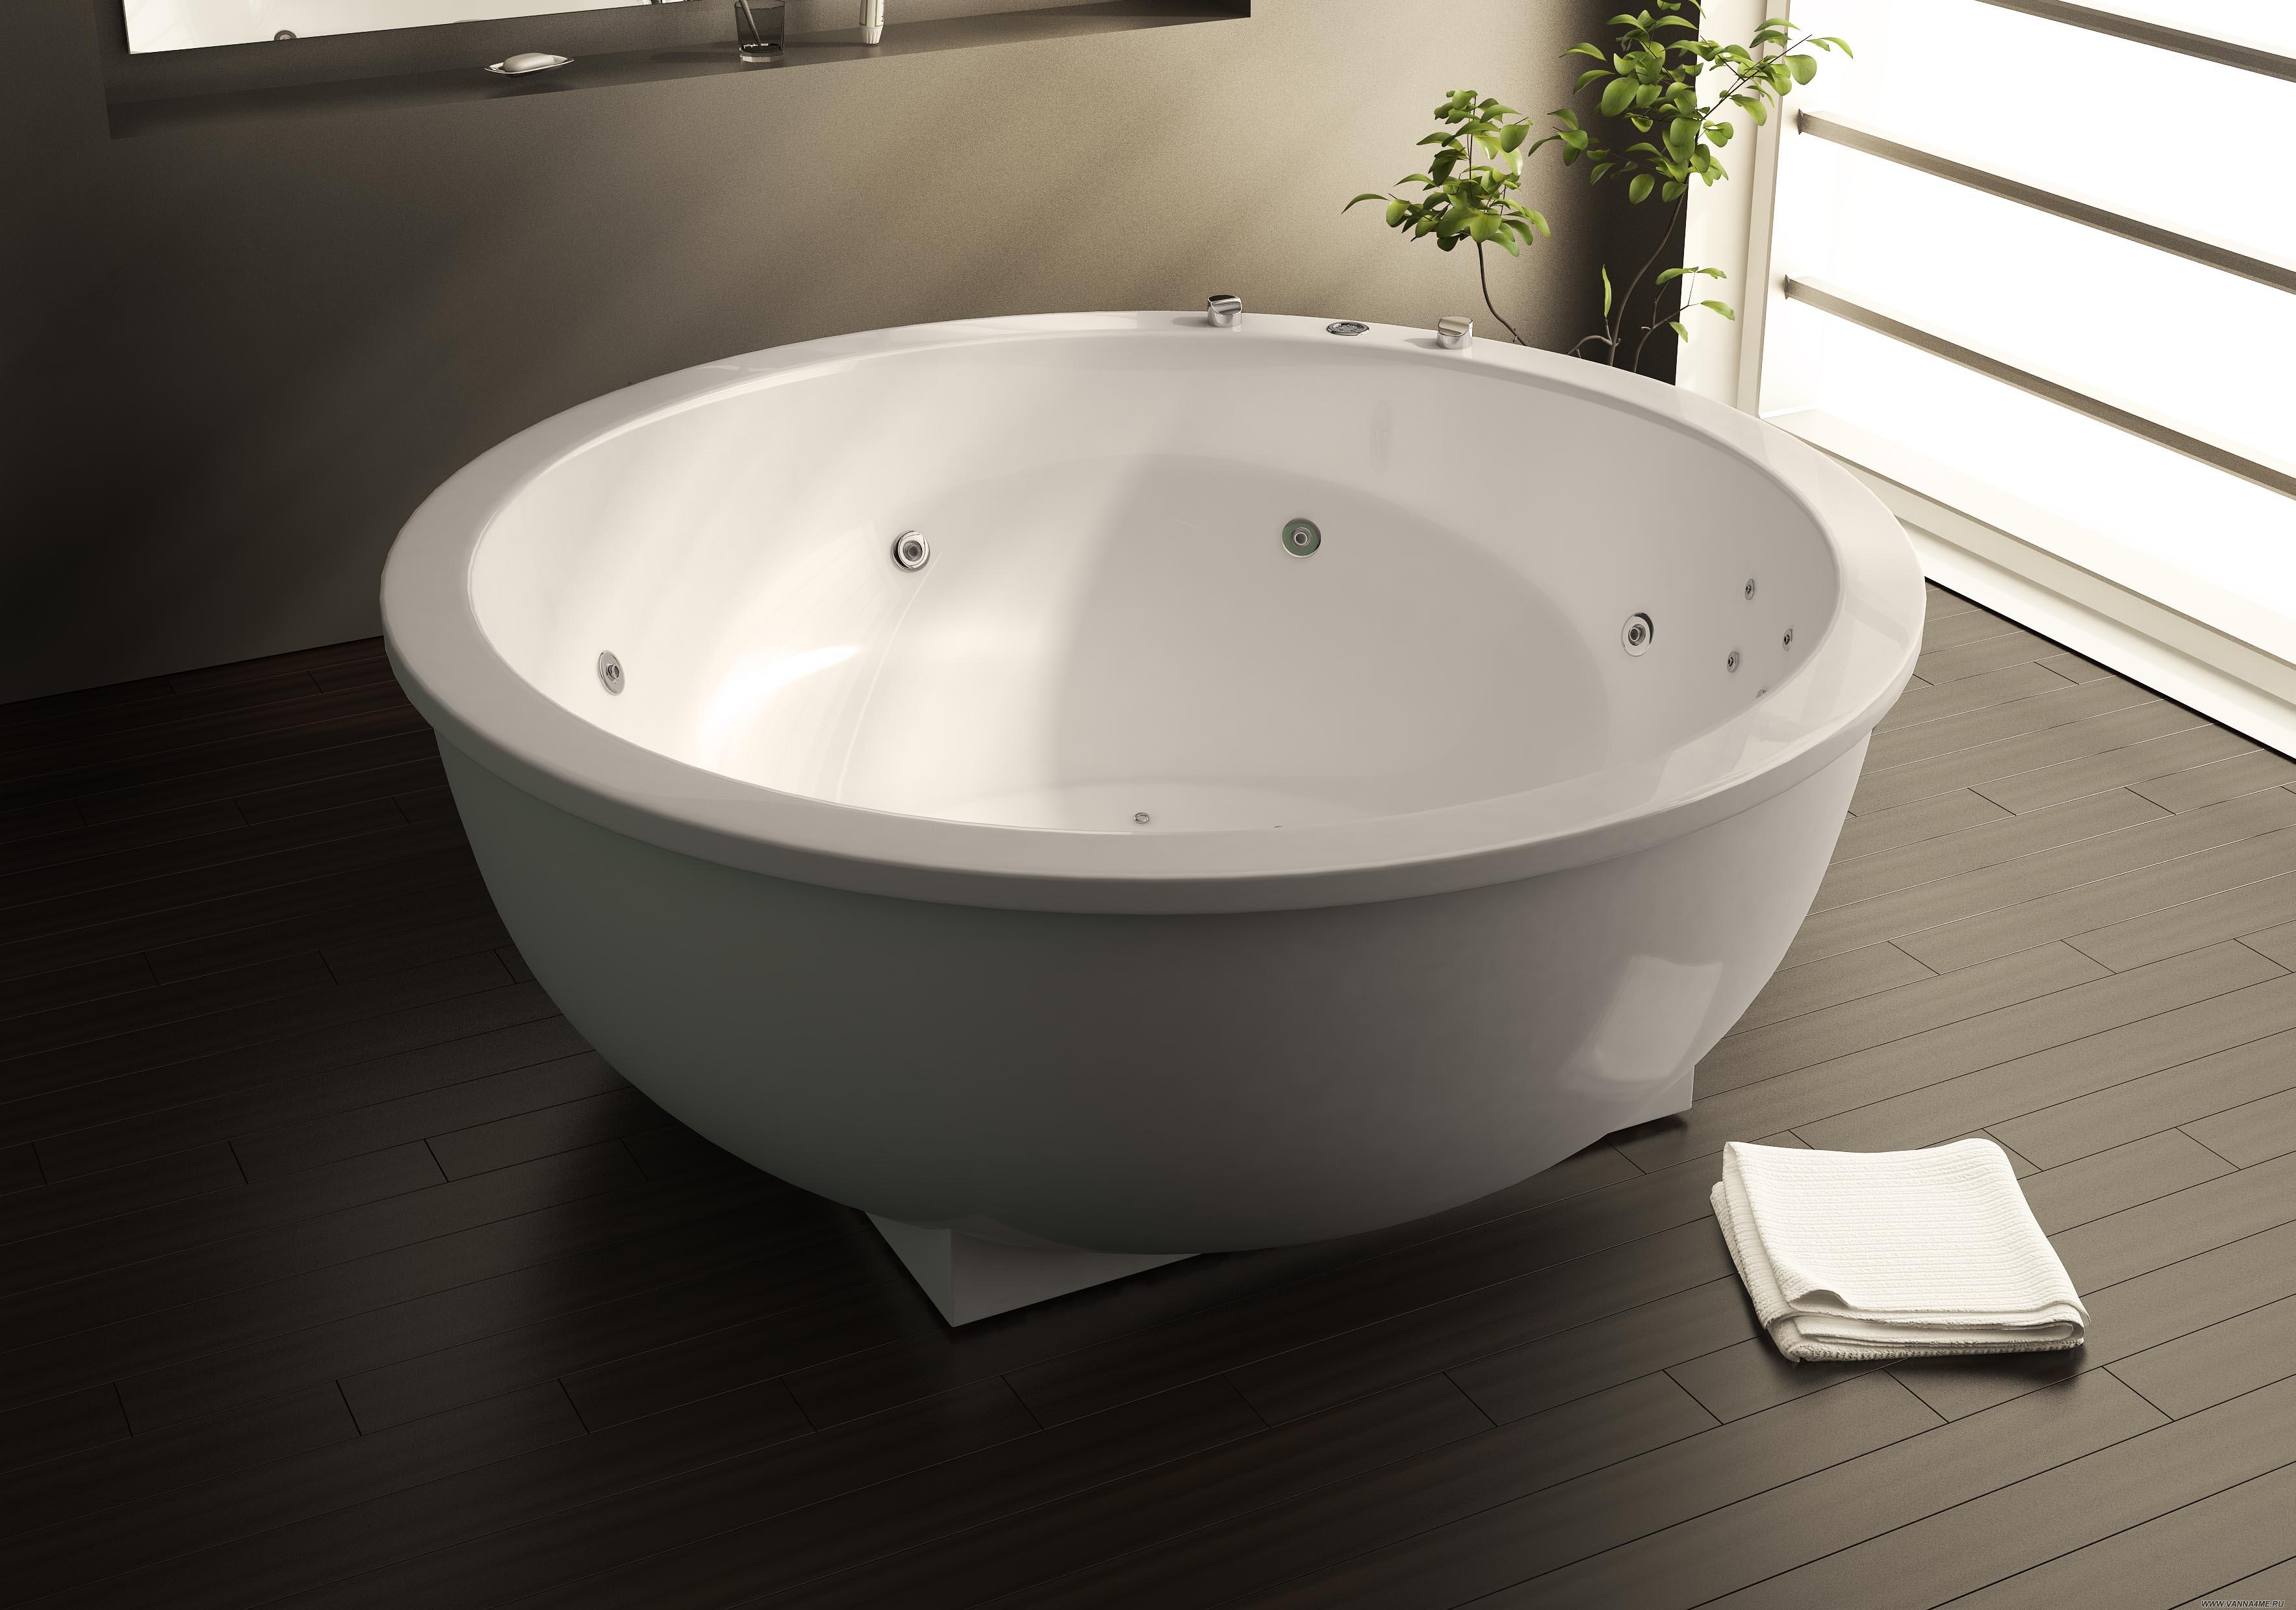 Which bath to choose: material, size, manufacturer